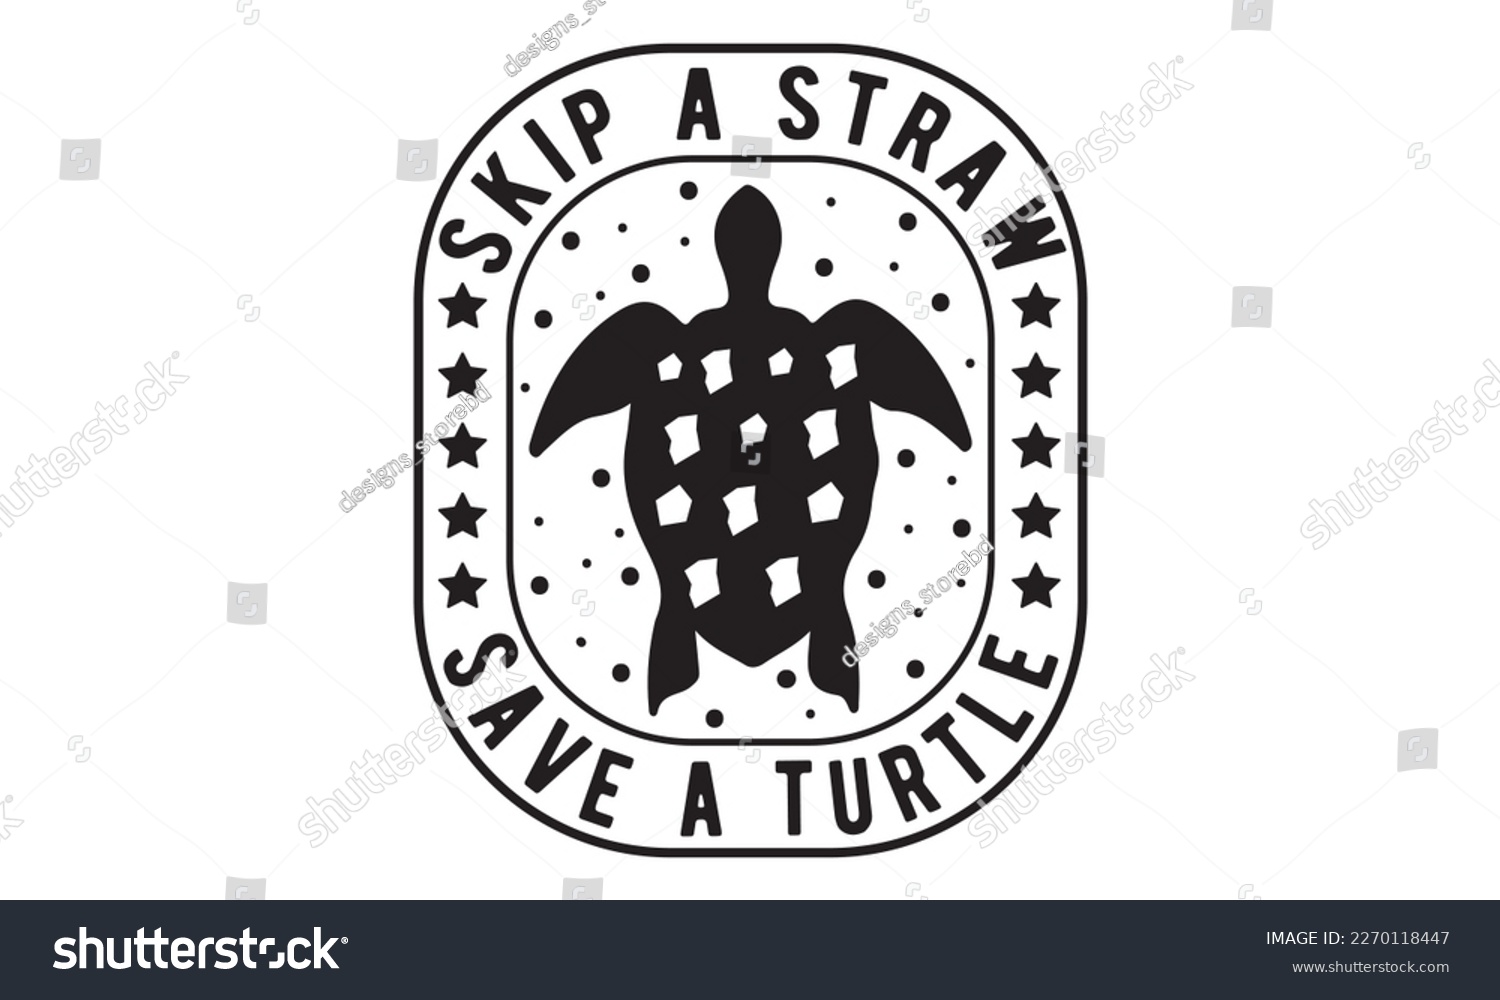 SVG of Skip a straw save a turtle svg, Earth day svg design bundle, Earth tshirt design bundle, April 22, earth vecttor icon map space, cut File Cricut, Printable Vector Illustration, tshirt eps svg